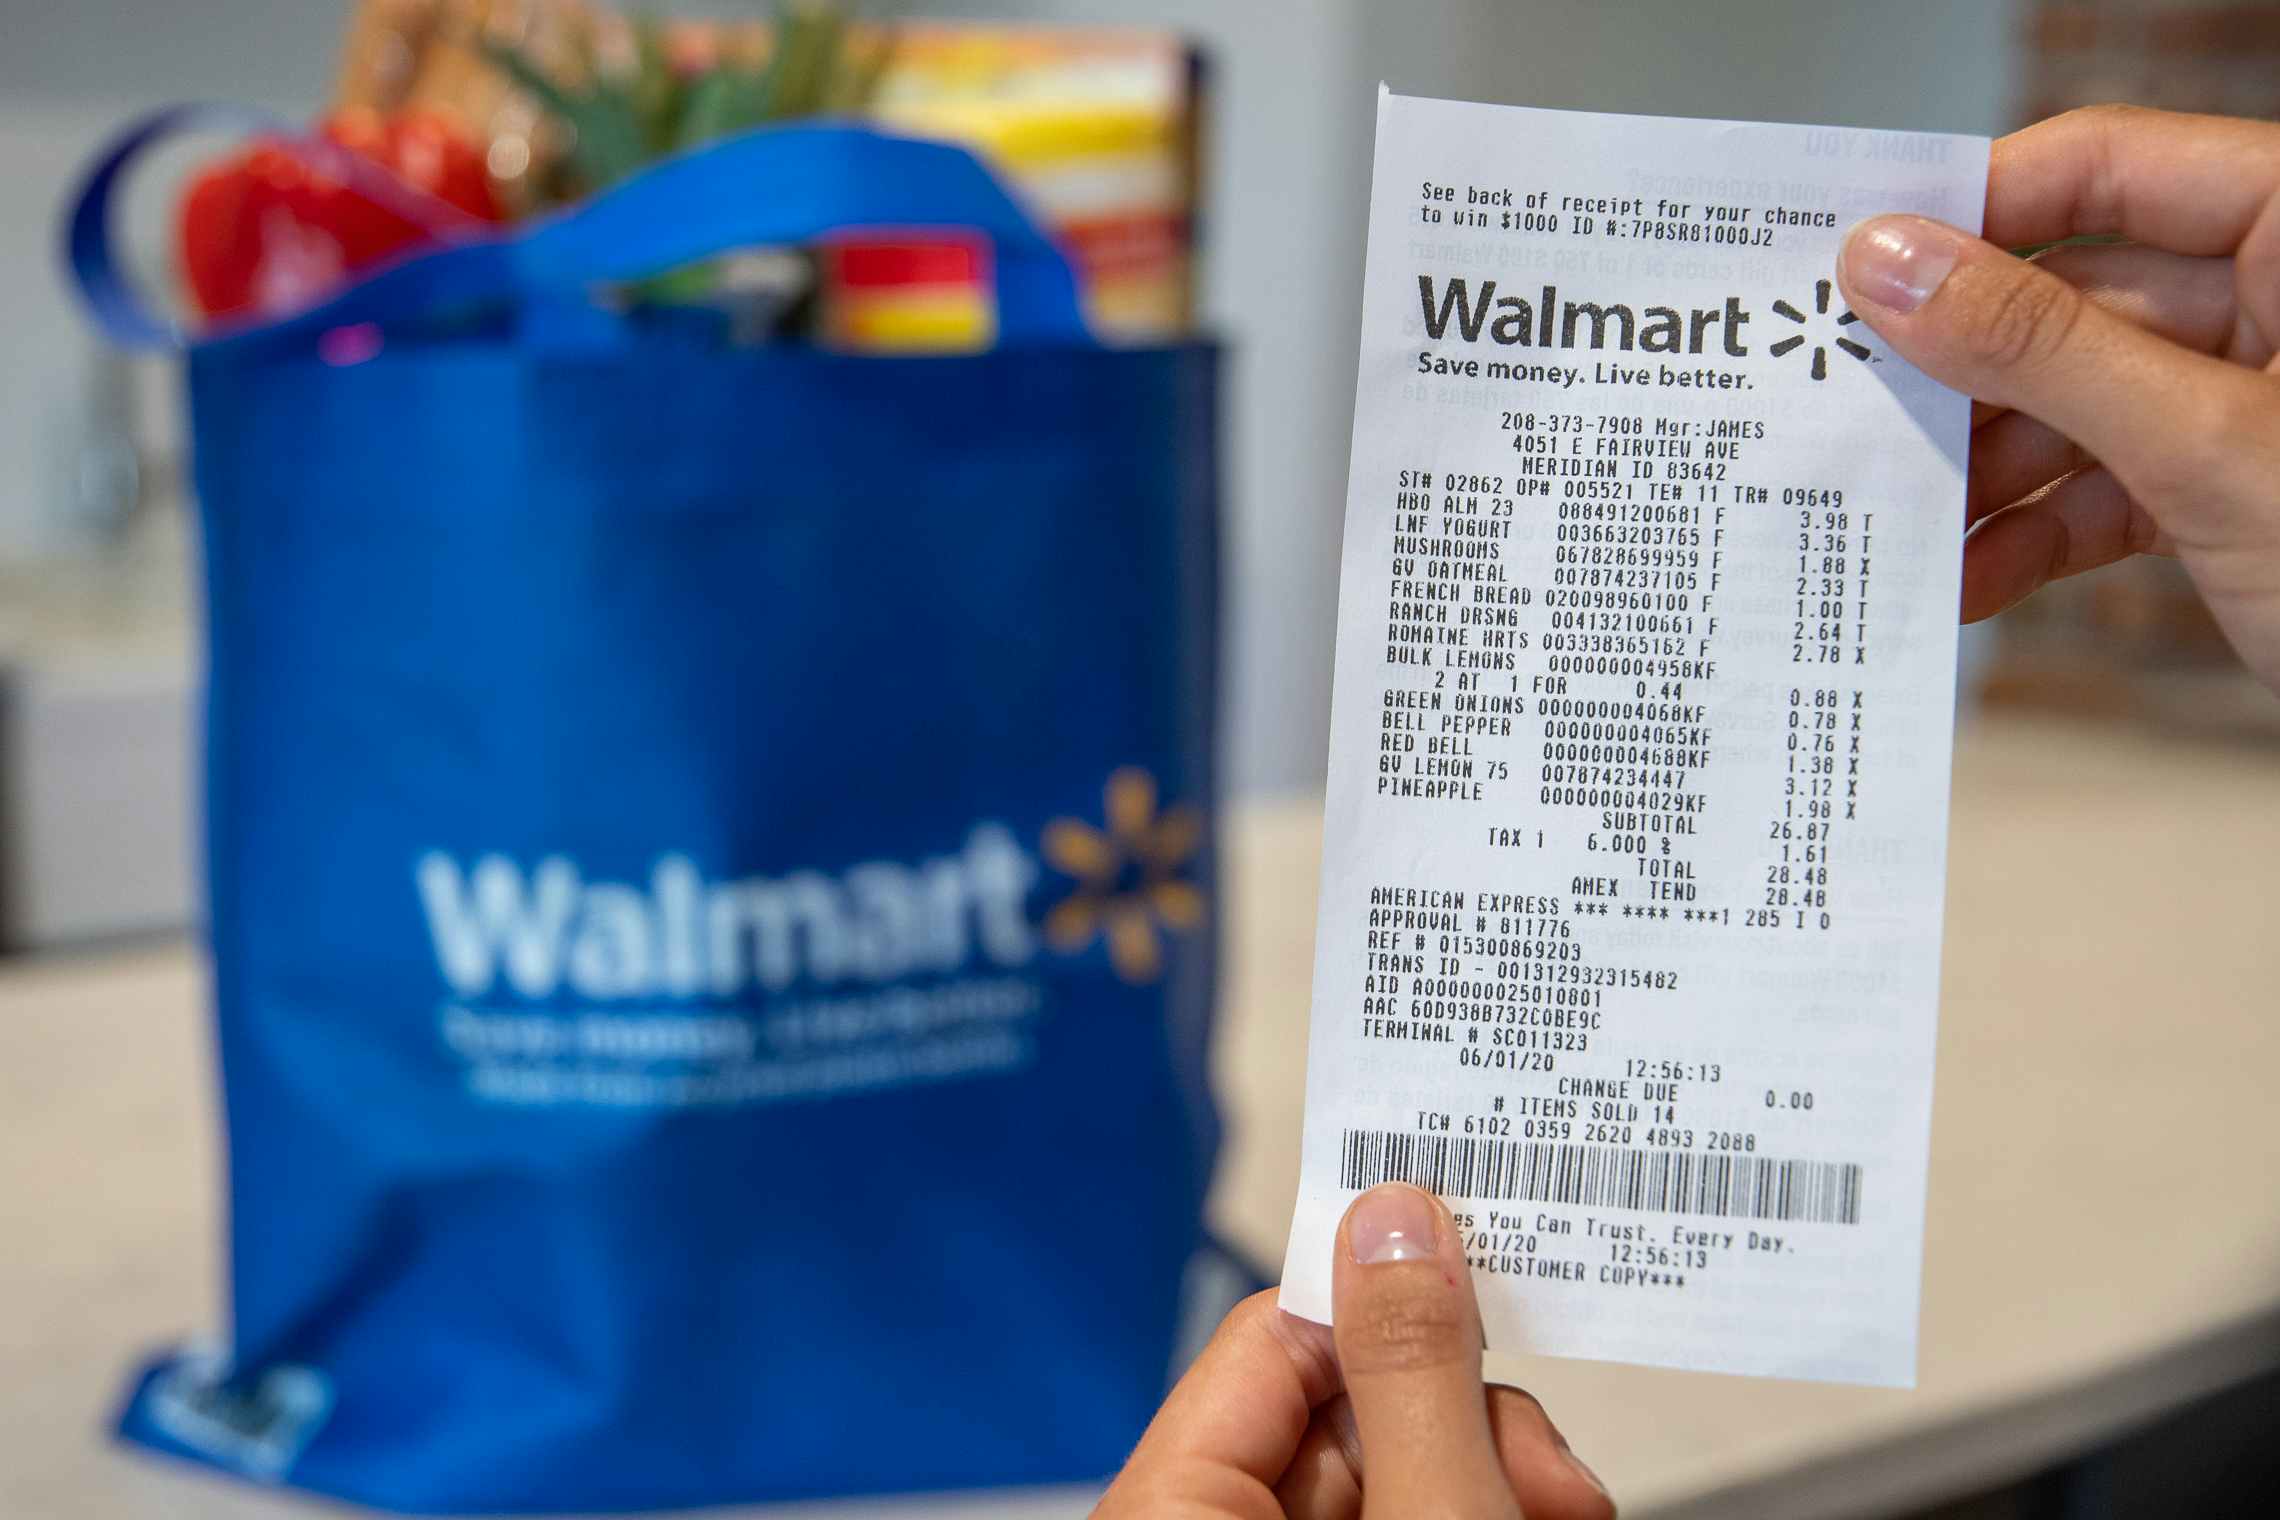 A walmart grocery receipt in front of groceries on a counter.